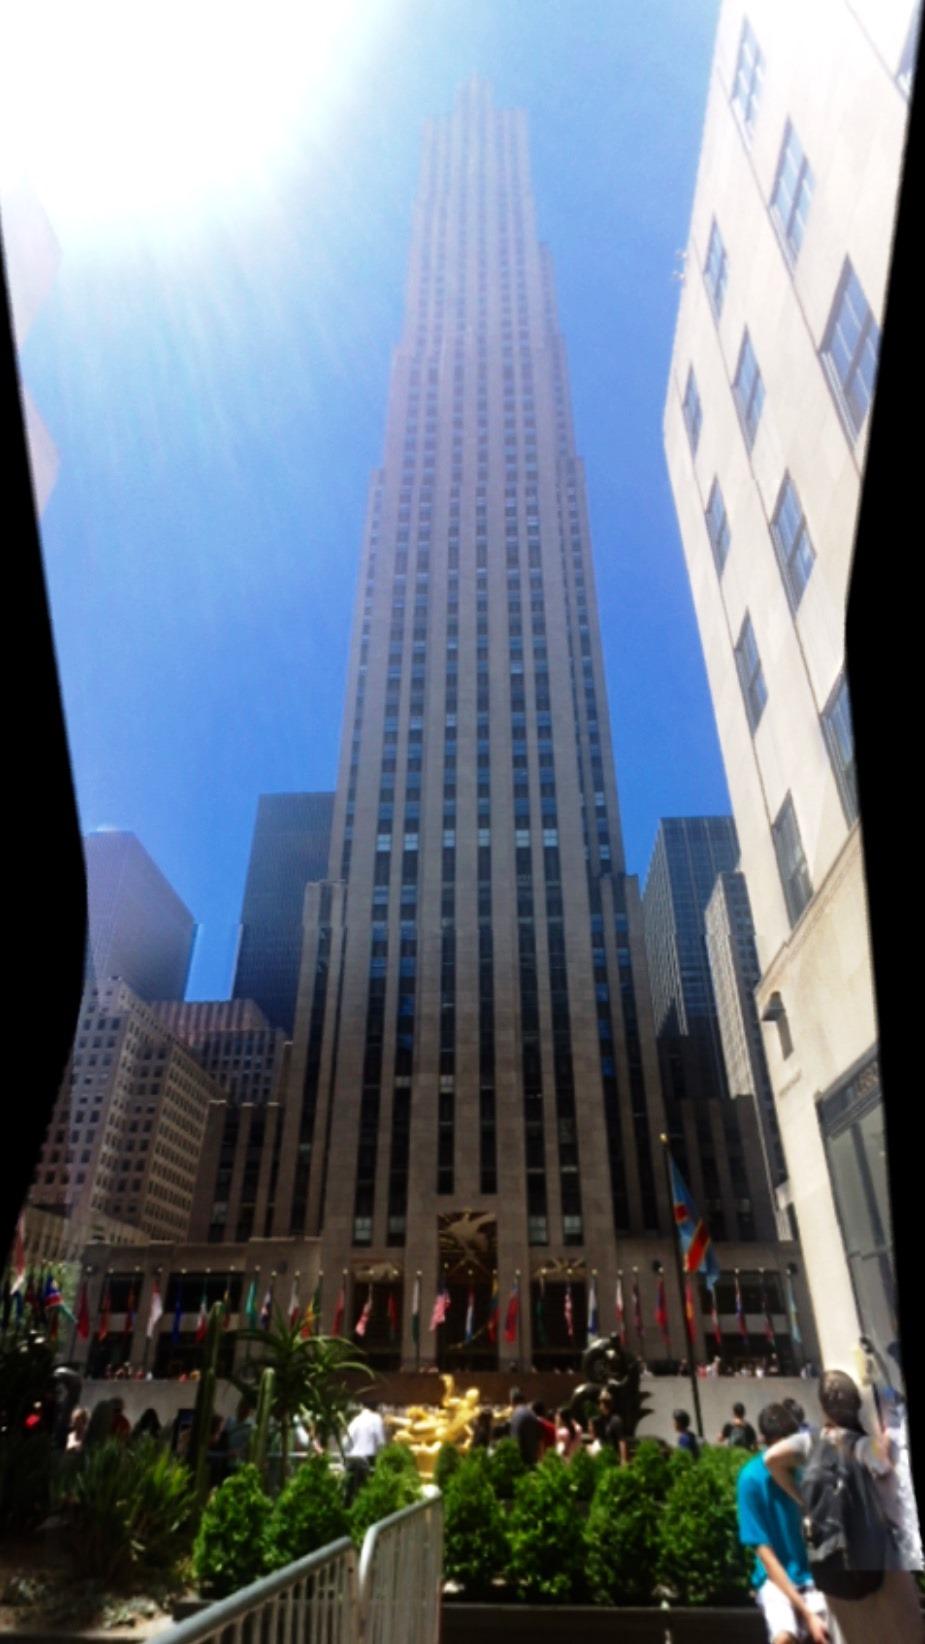 30 Rock 30 Rock goes by many names: 30 Rock, The Slab, Rock Center, 30 Rockefeller Center, GE Building, RCA Building, and the Comcast Building. It is also the centerpiece of all of Rockefeller Center.